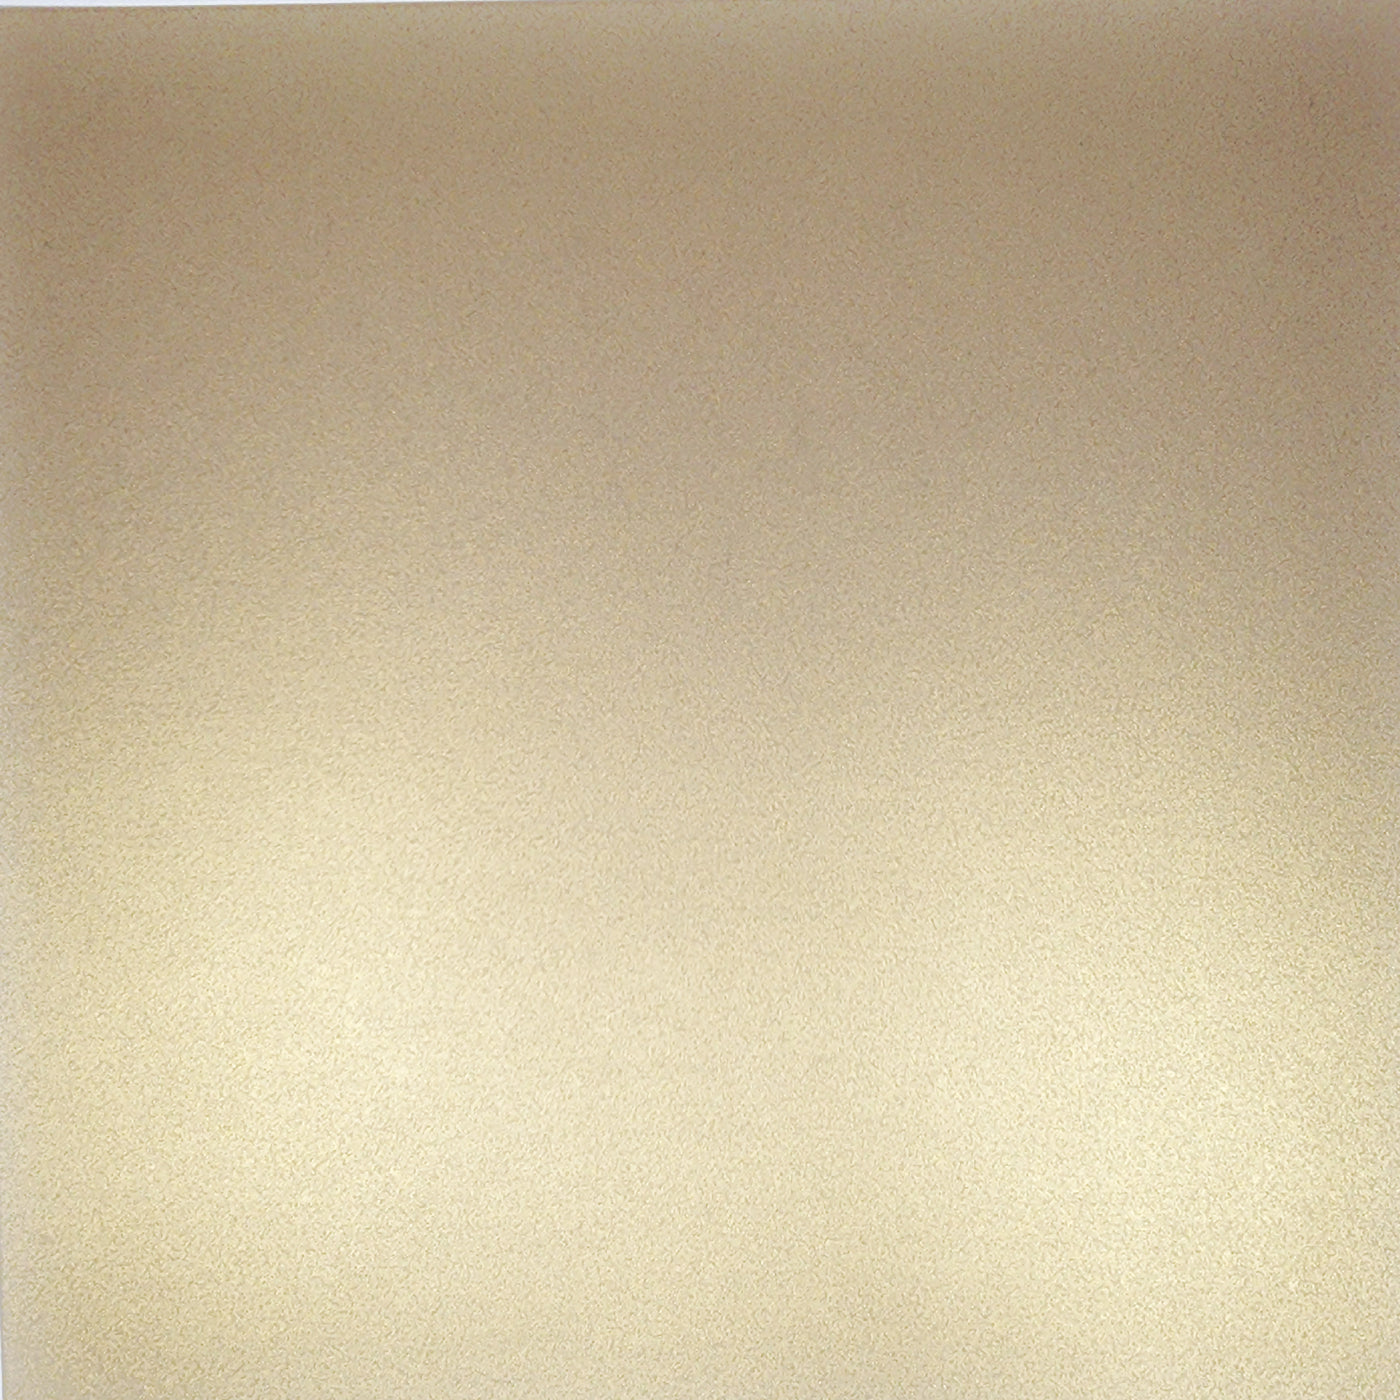 GOLD - 12x12 Pearlescent Cardstock - Sirio Pearl